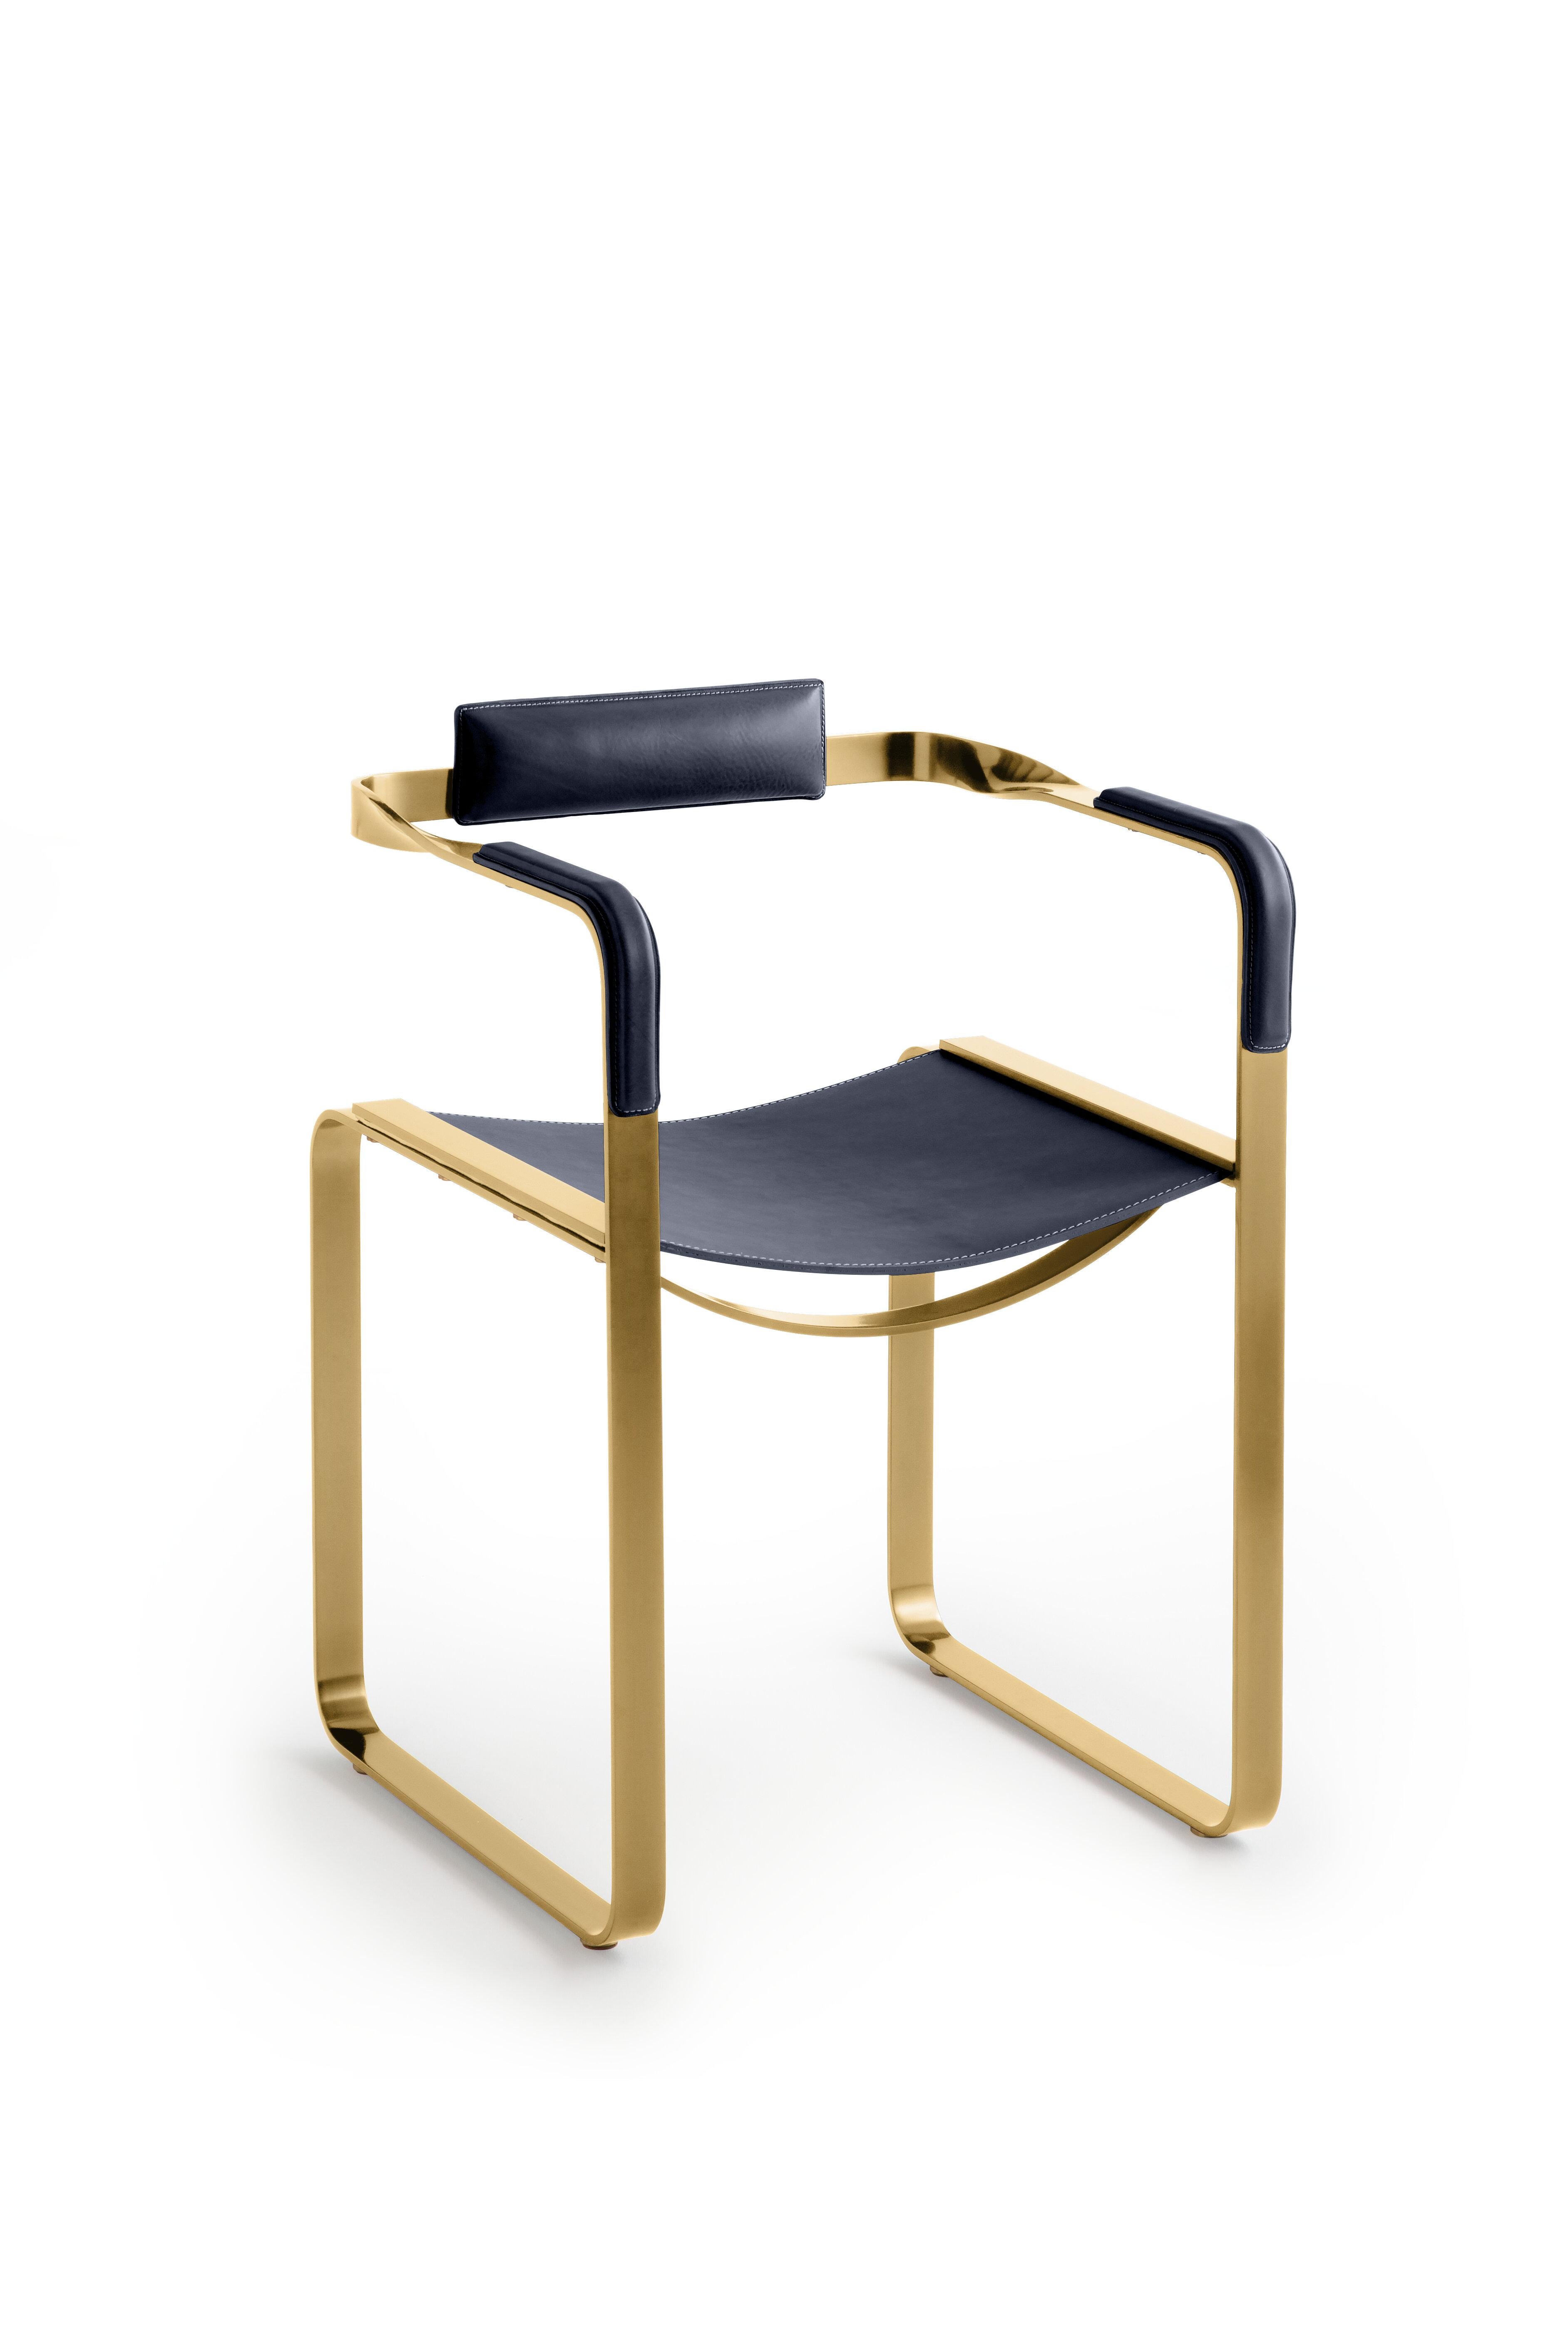 Set of 3 Armchair, Aged Brass Steel & Blue Navy Saddle, Contemporary Style In New Condition For Sale In Alcoy, Alicante